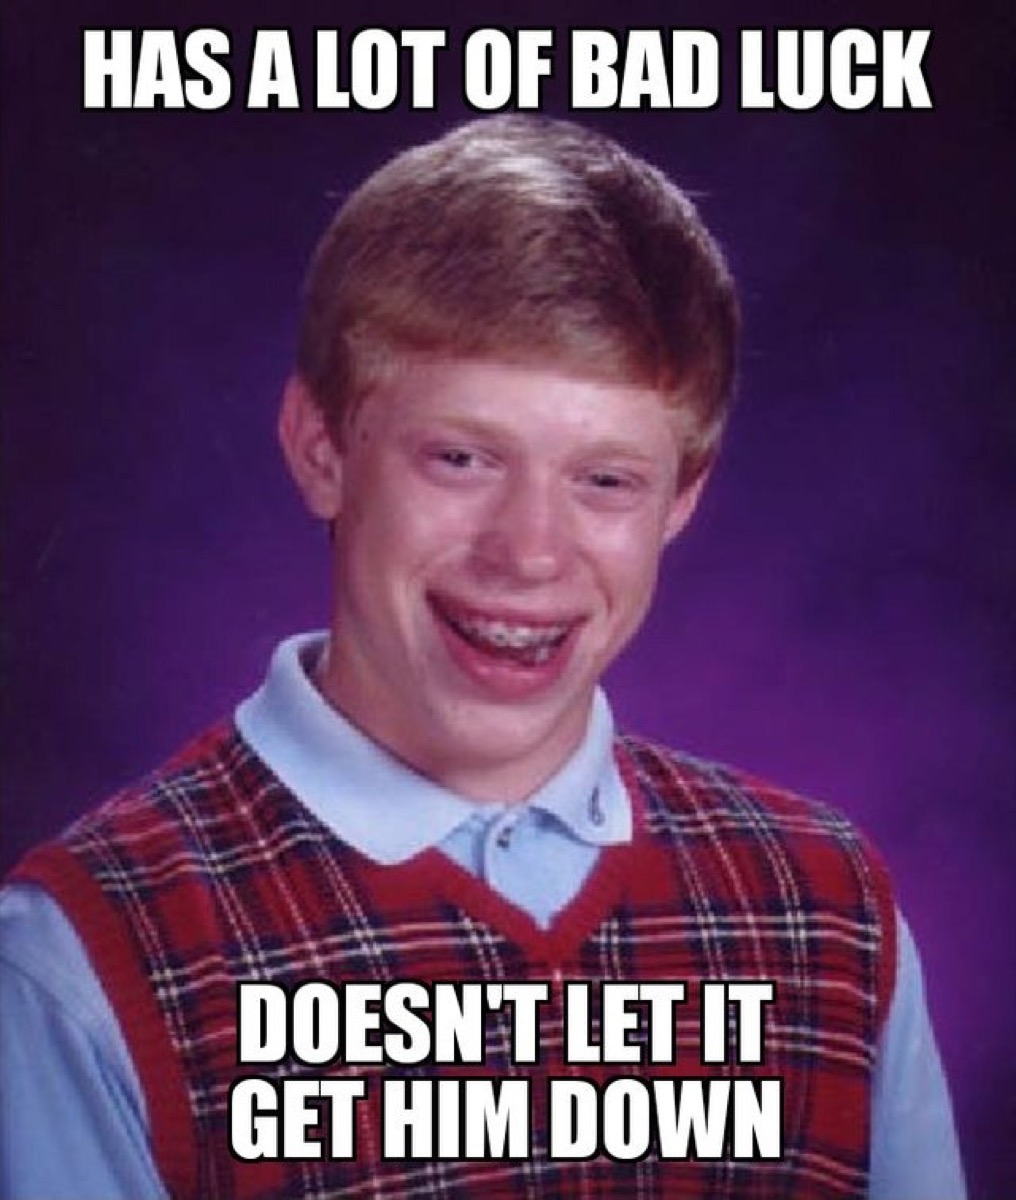 School picture meme with caption "Has a lot of bad luck, doesn't let it get him down."